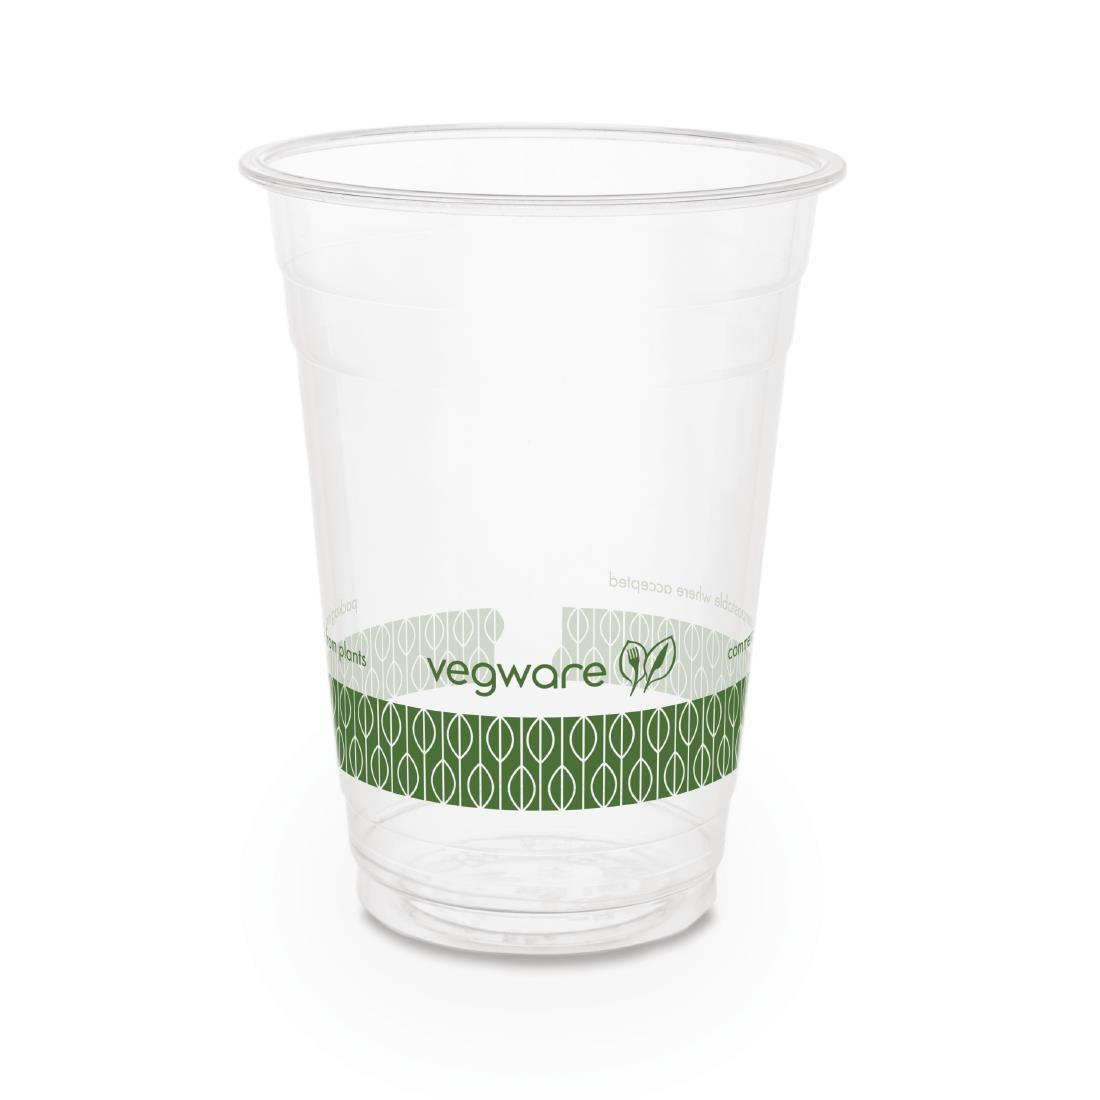 Vegware Compostable PLA Cold Cups 455ml / 16oz (Pack of 1000) - GH015  - 1